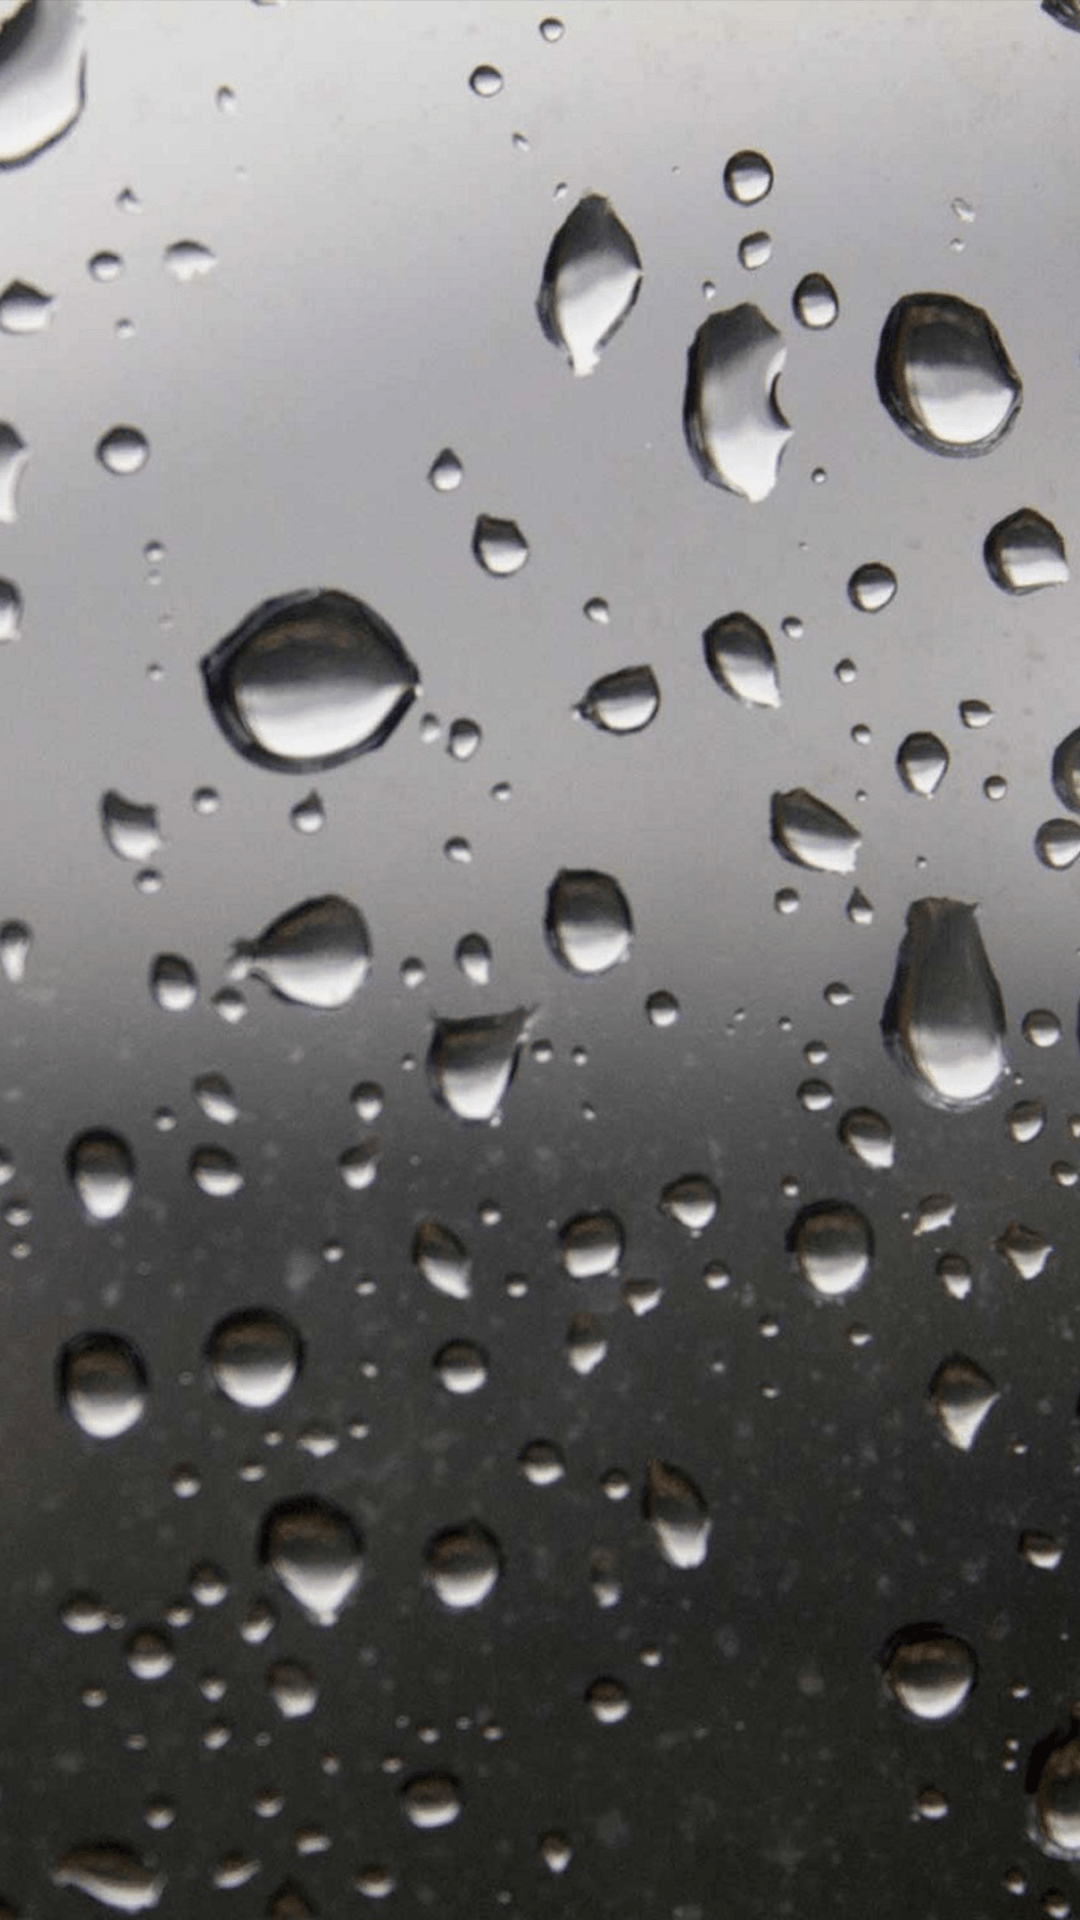 Free HD Water Drops iPhone Wallpaper For Download .0562